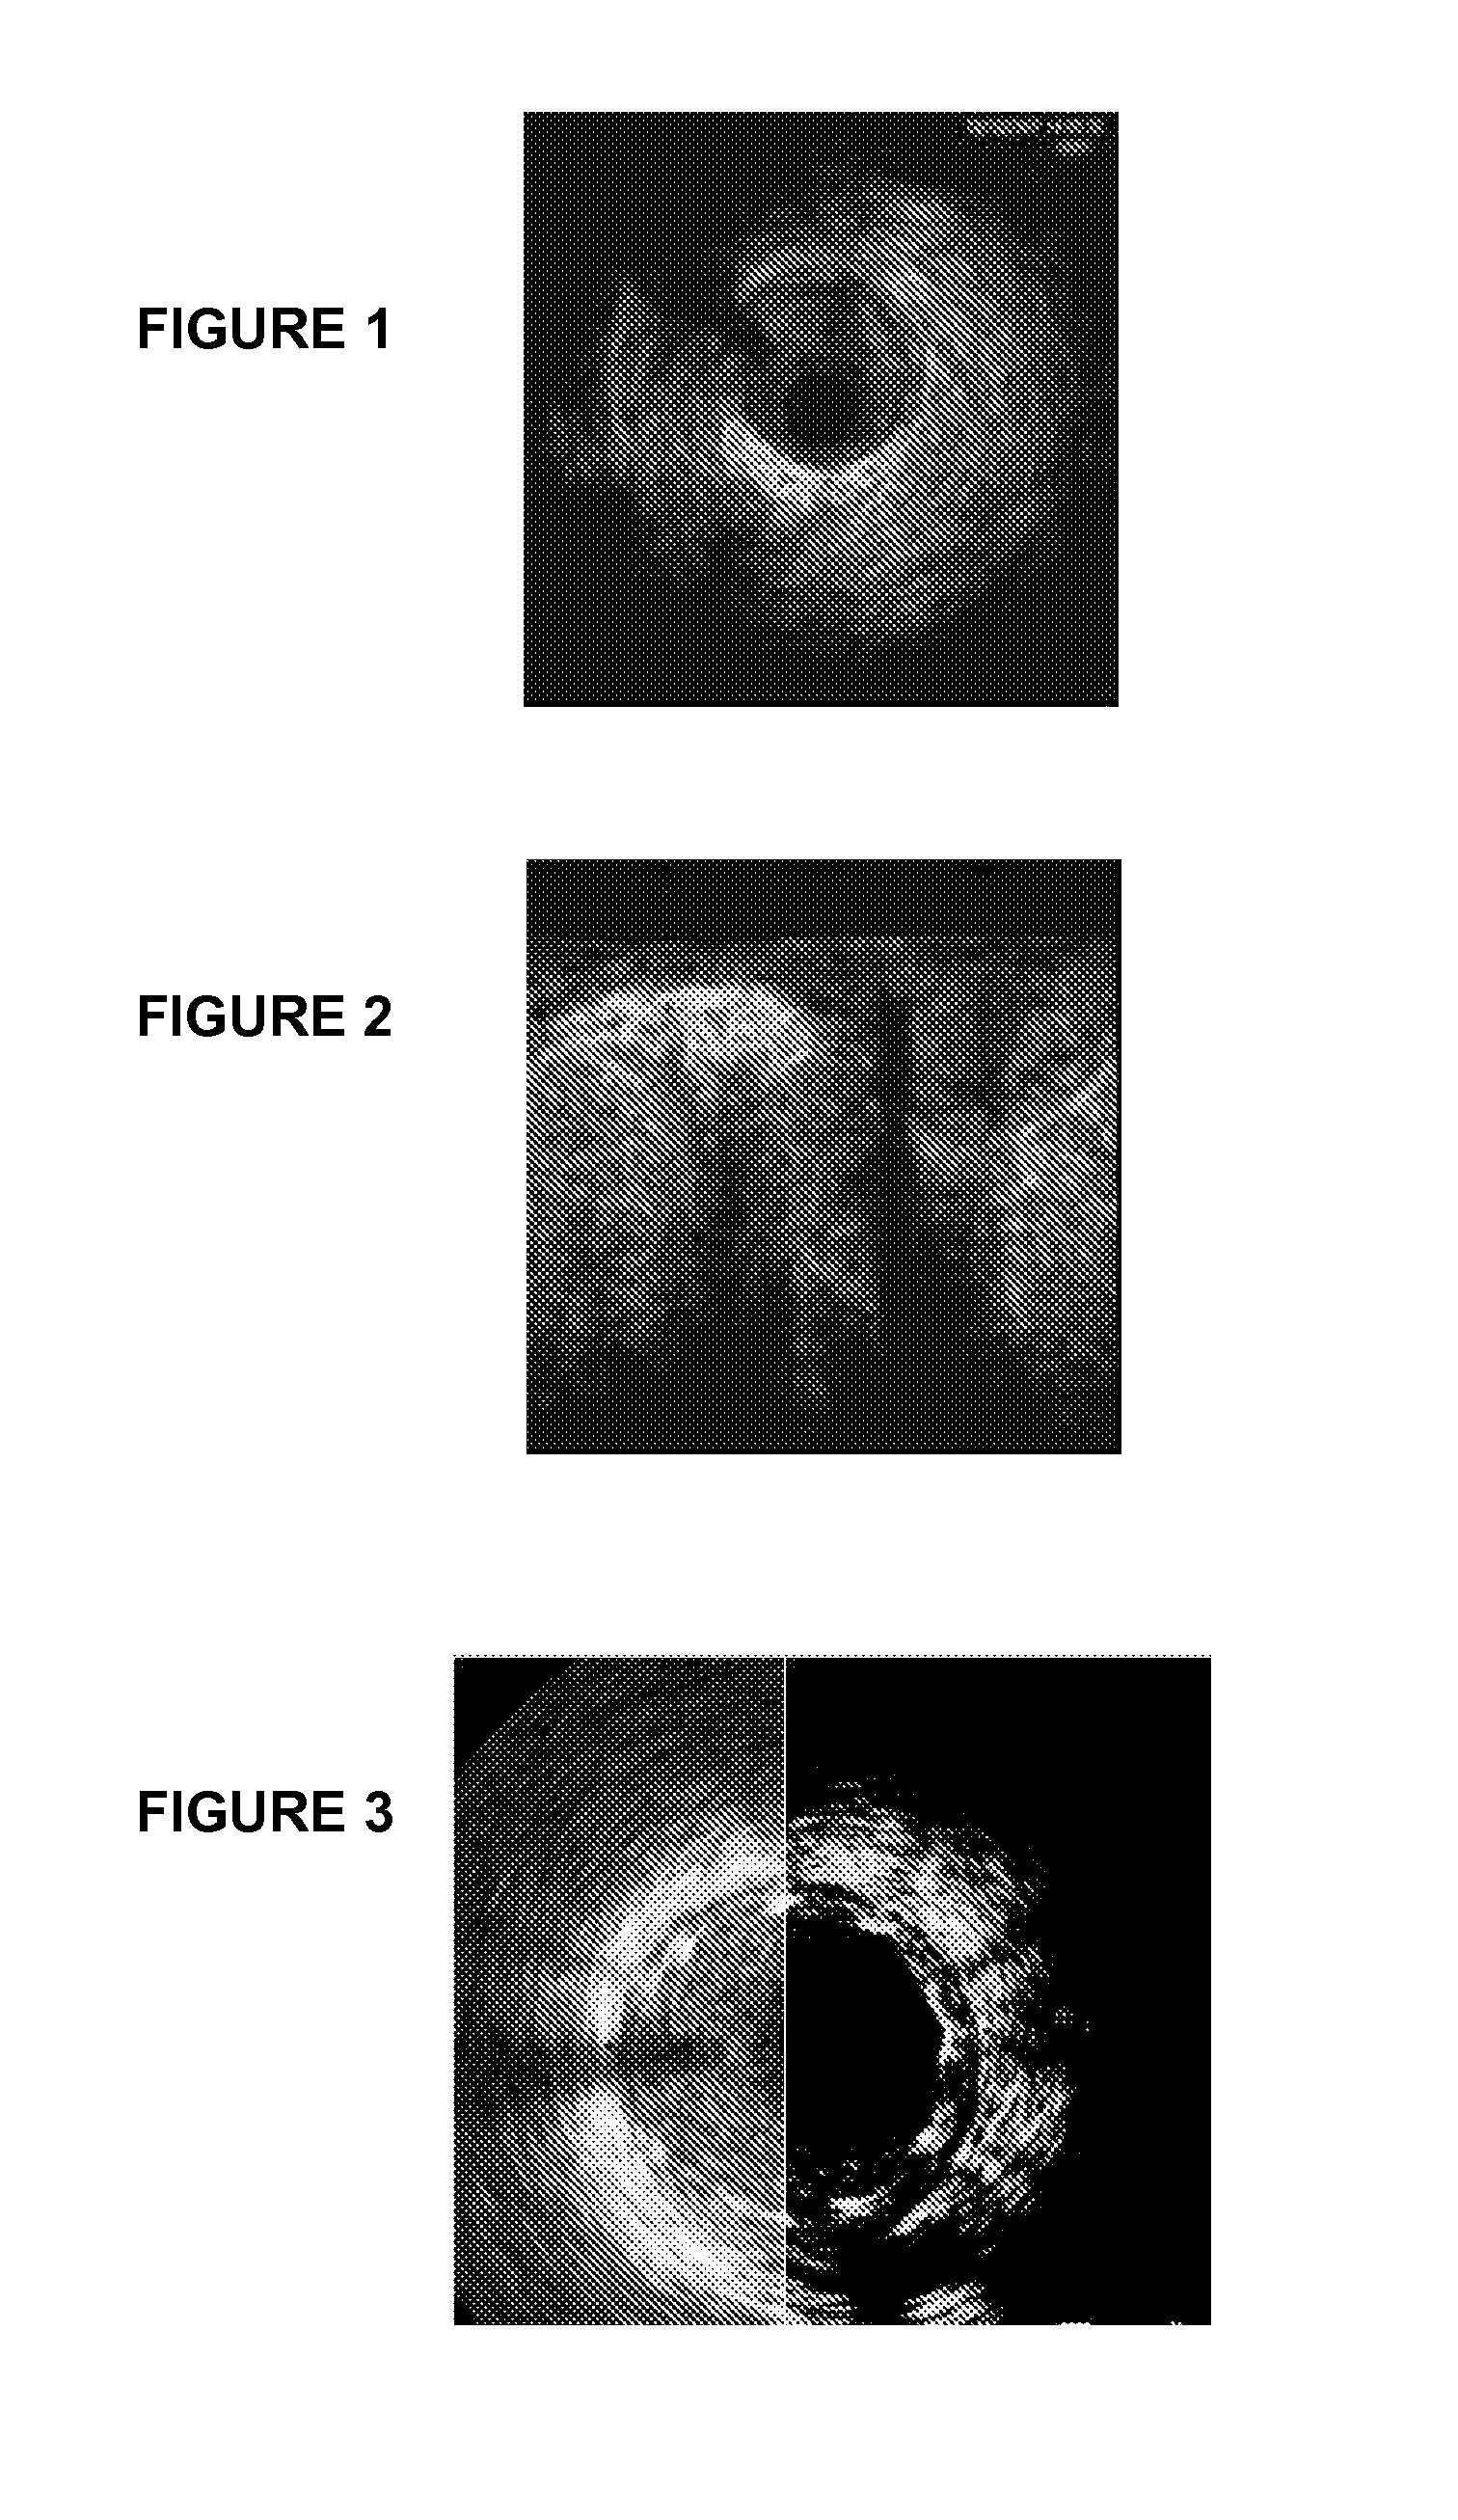 Method and system for stabilizing a series of intravascular ultrasound images and extracting vessel lumen from the images